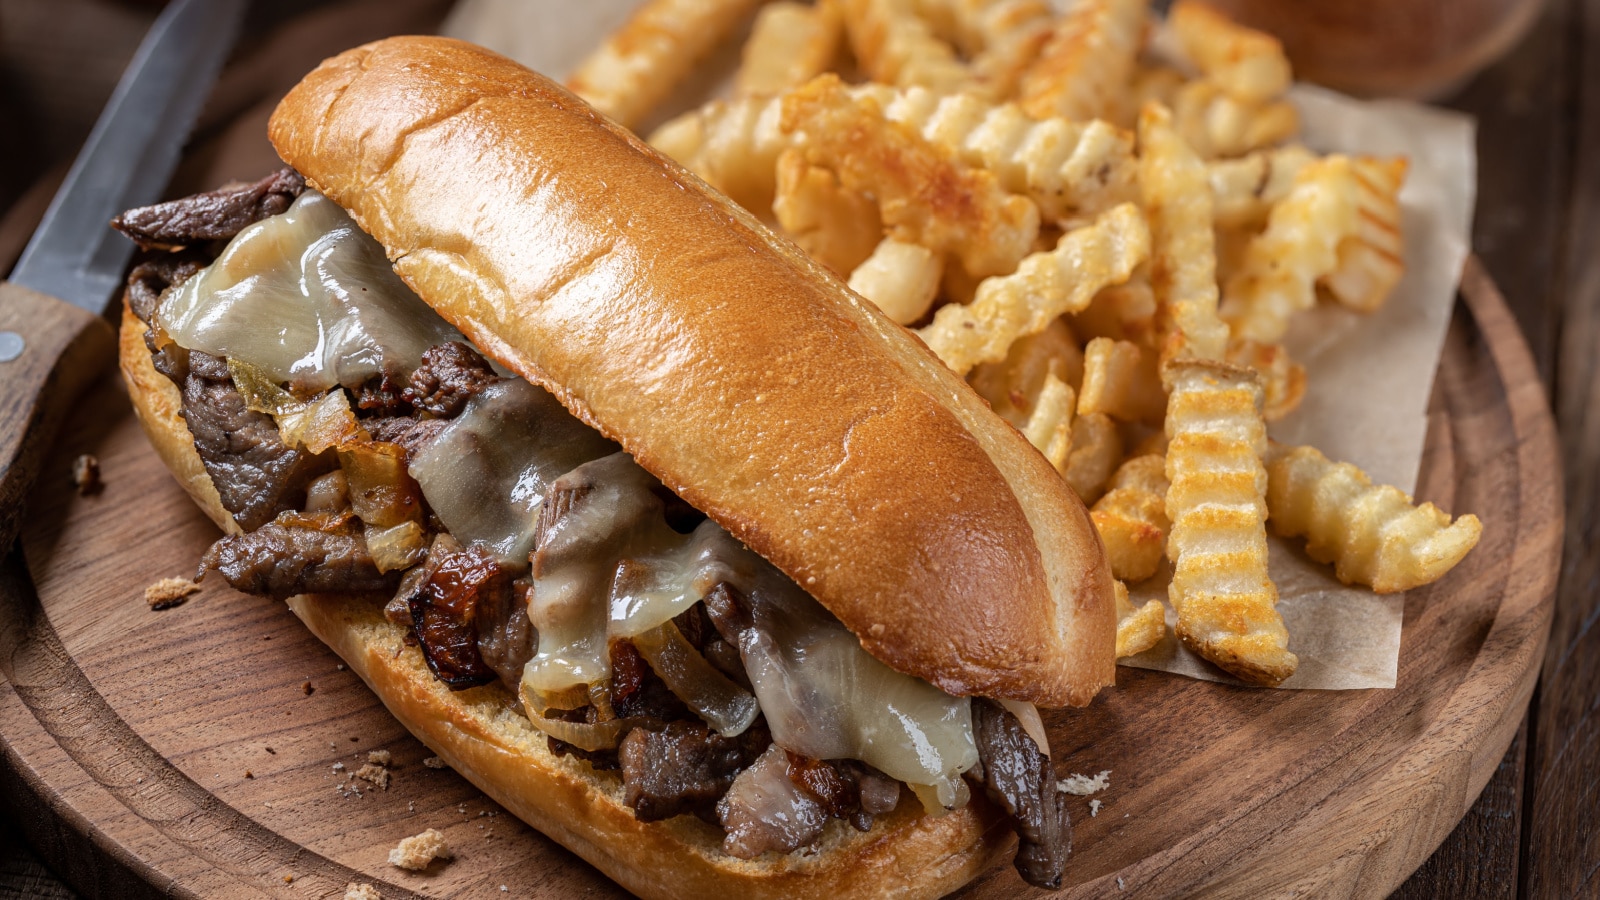 Philly cheesesteak sandwich made with steak, cheese and onions on a hoagie roll with french fries on a wooden board